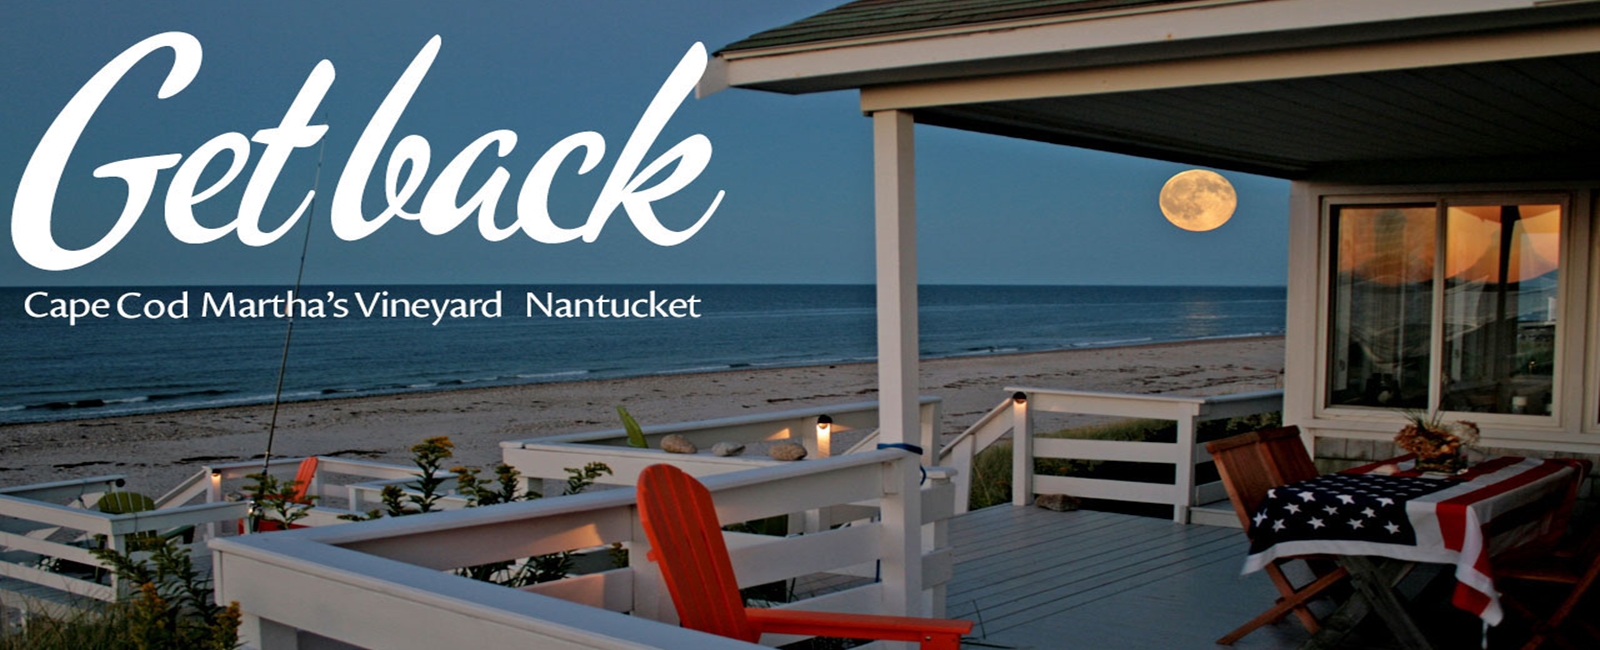 Enjoy our GetBacktoCapeCod video that highlights the many reasons we all plan to Get Back to the Cape, Martha's Vineyard and Nantucket as soon as possible.